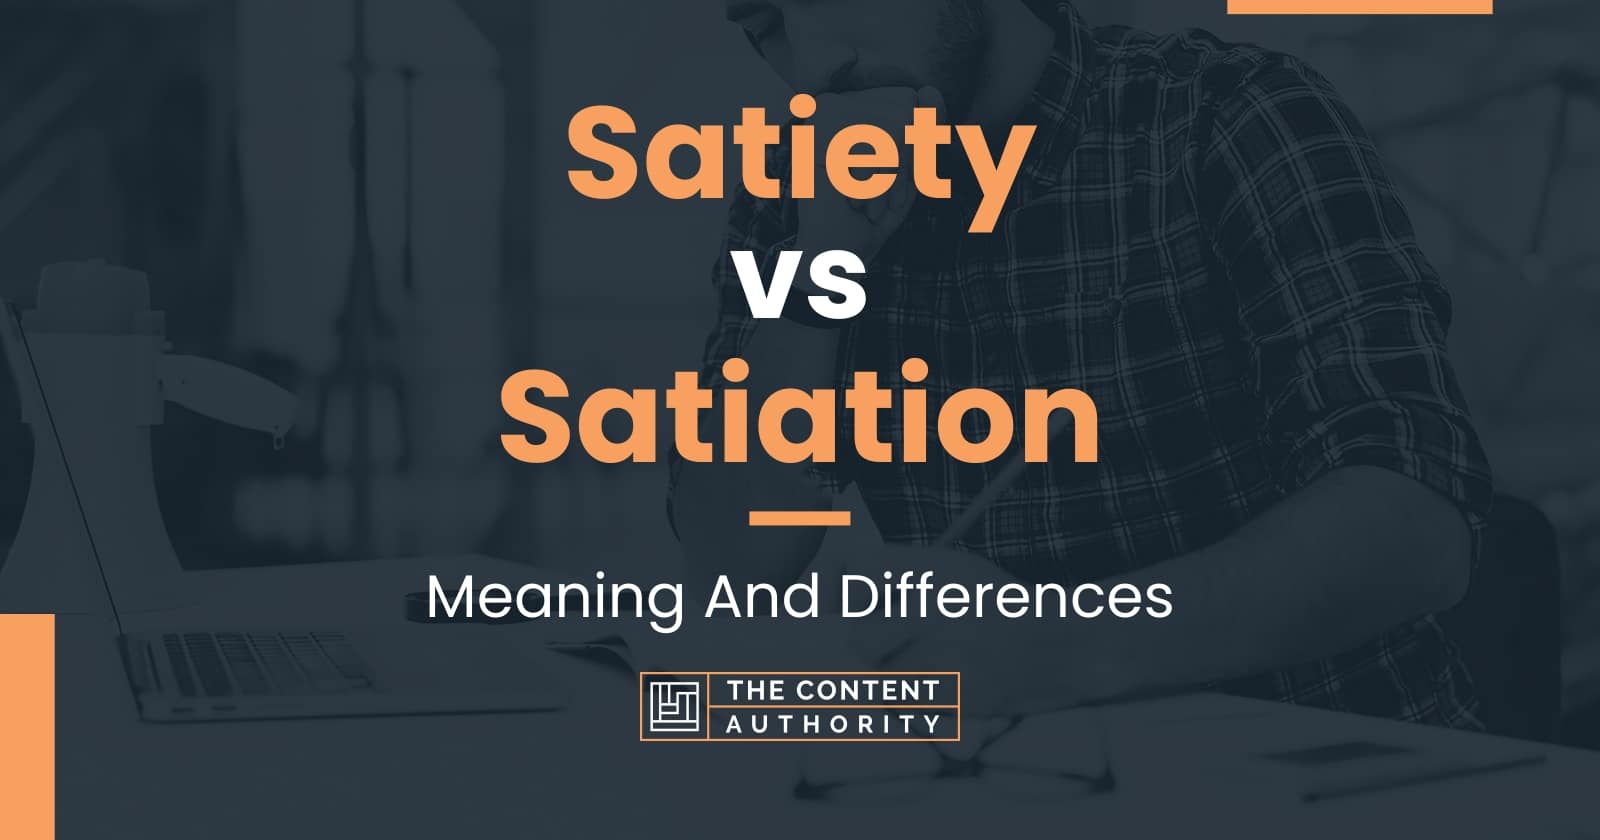 Satiety vs Satiation: Meaning And Differences